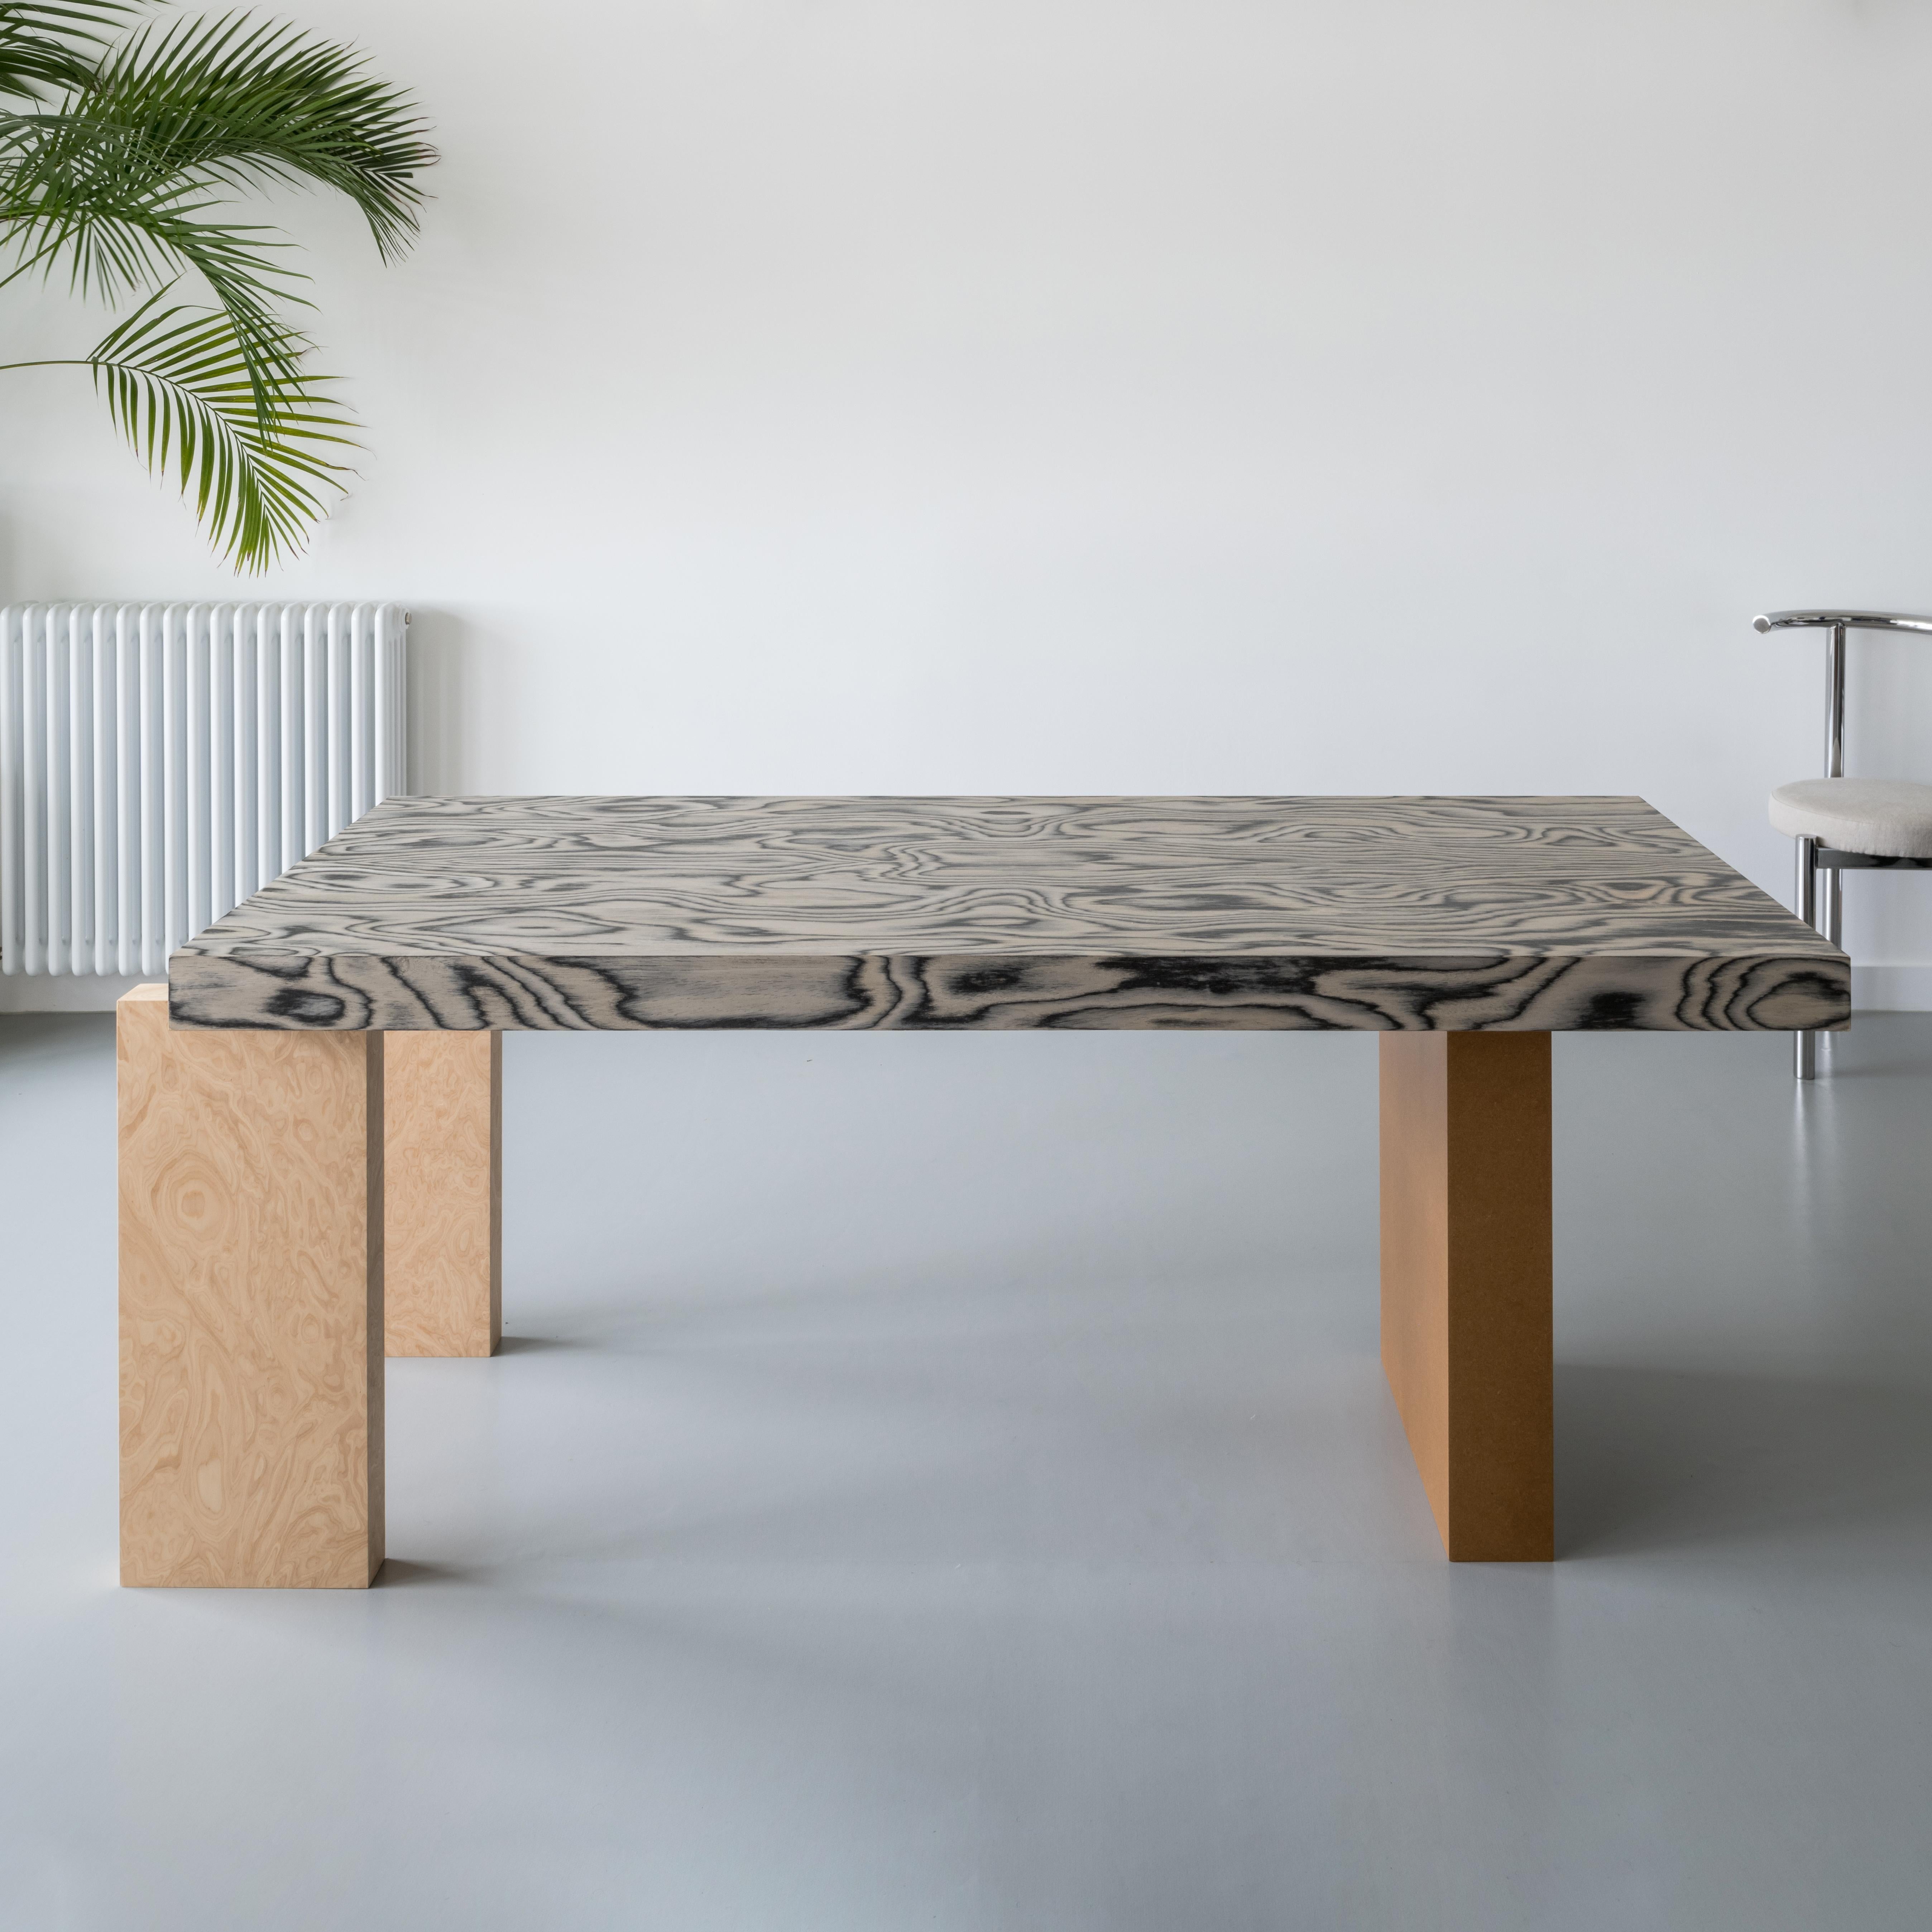 This stunning table is an original Studio James Stickley design. 

This post modern influenced but contemporary dining table is both bold and unique. A perfect statement piece for any interior. The piece also works very well as a desk.

The